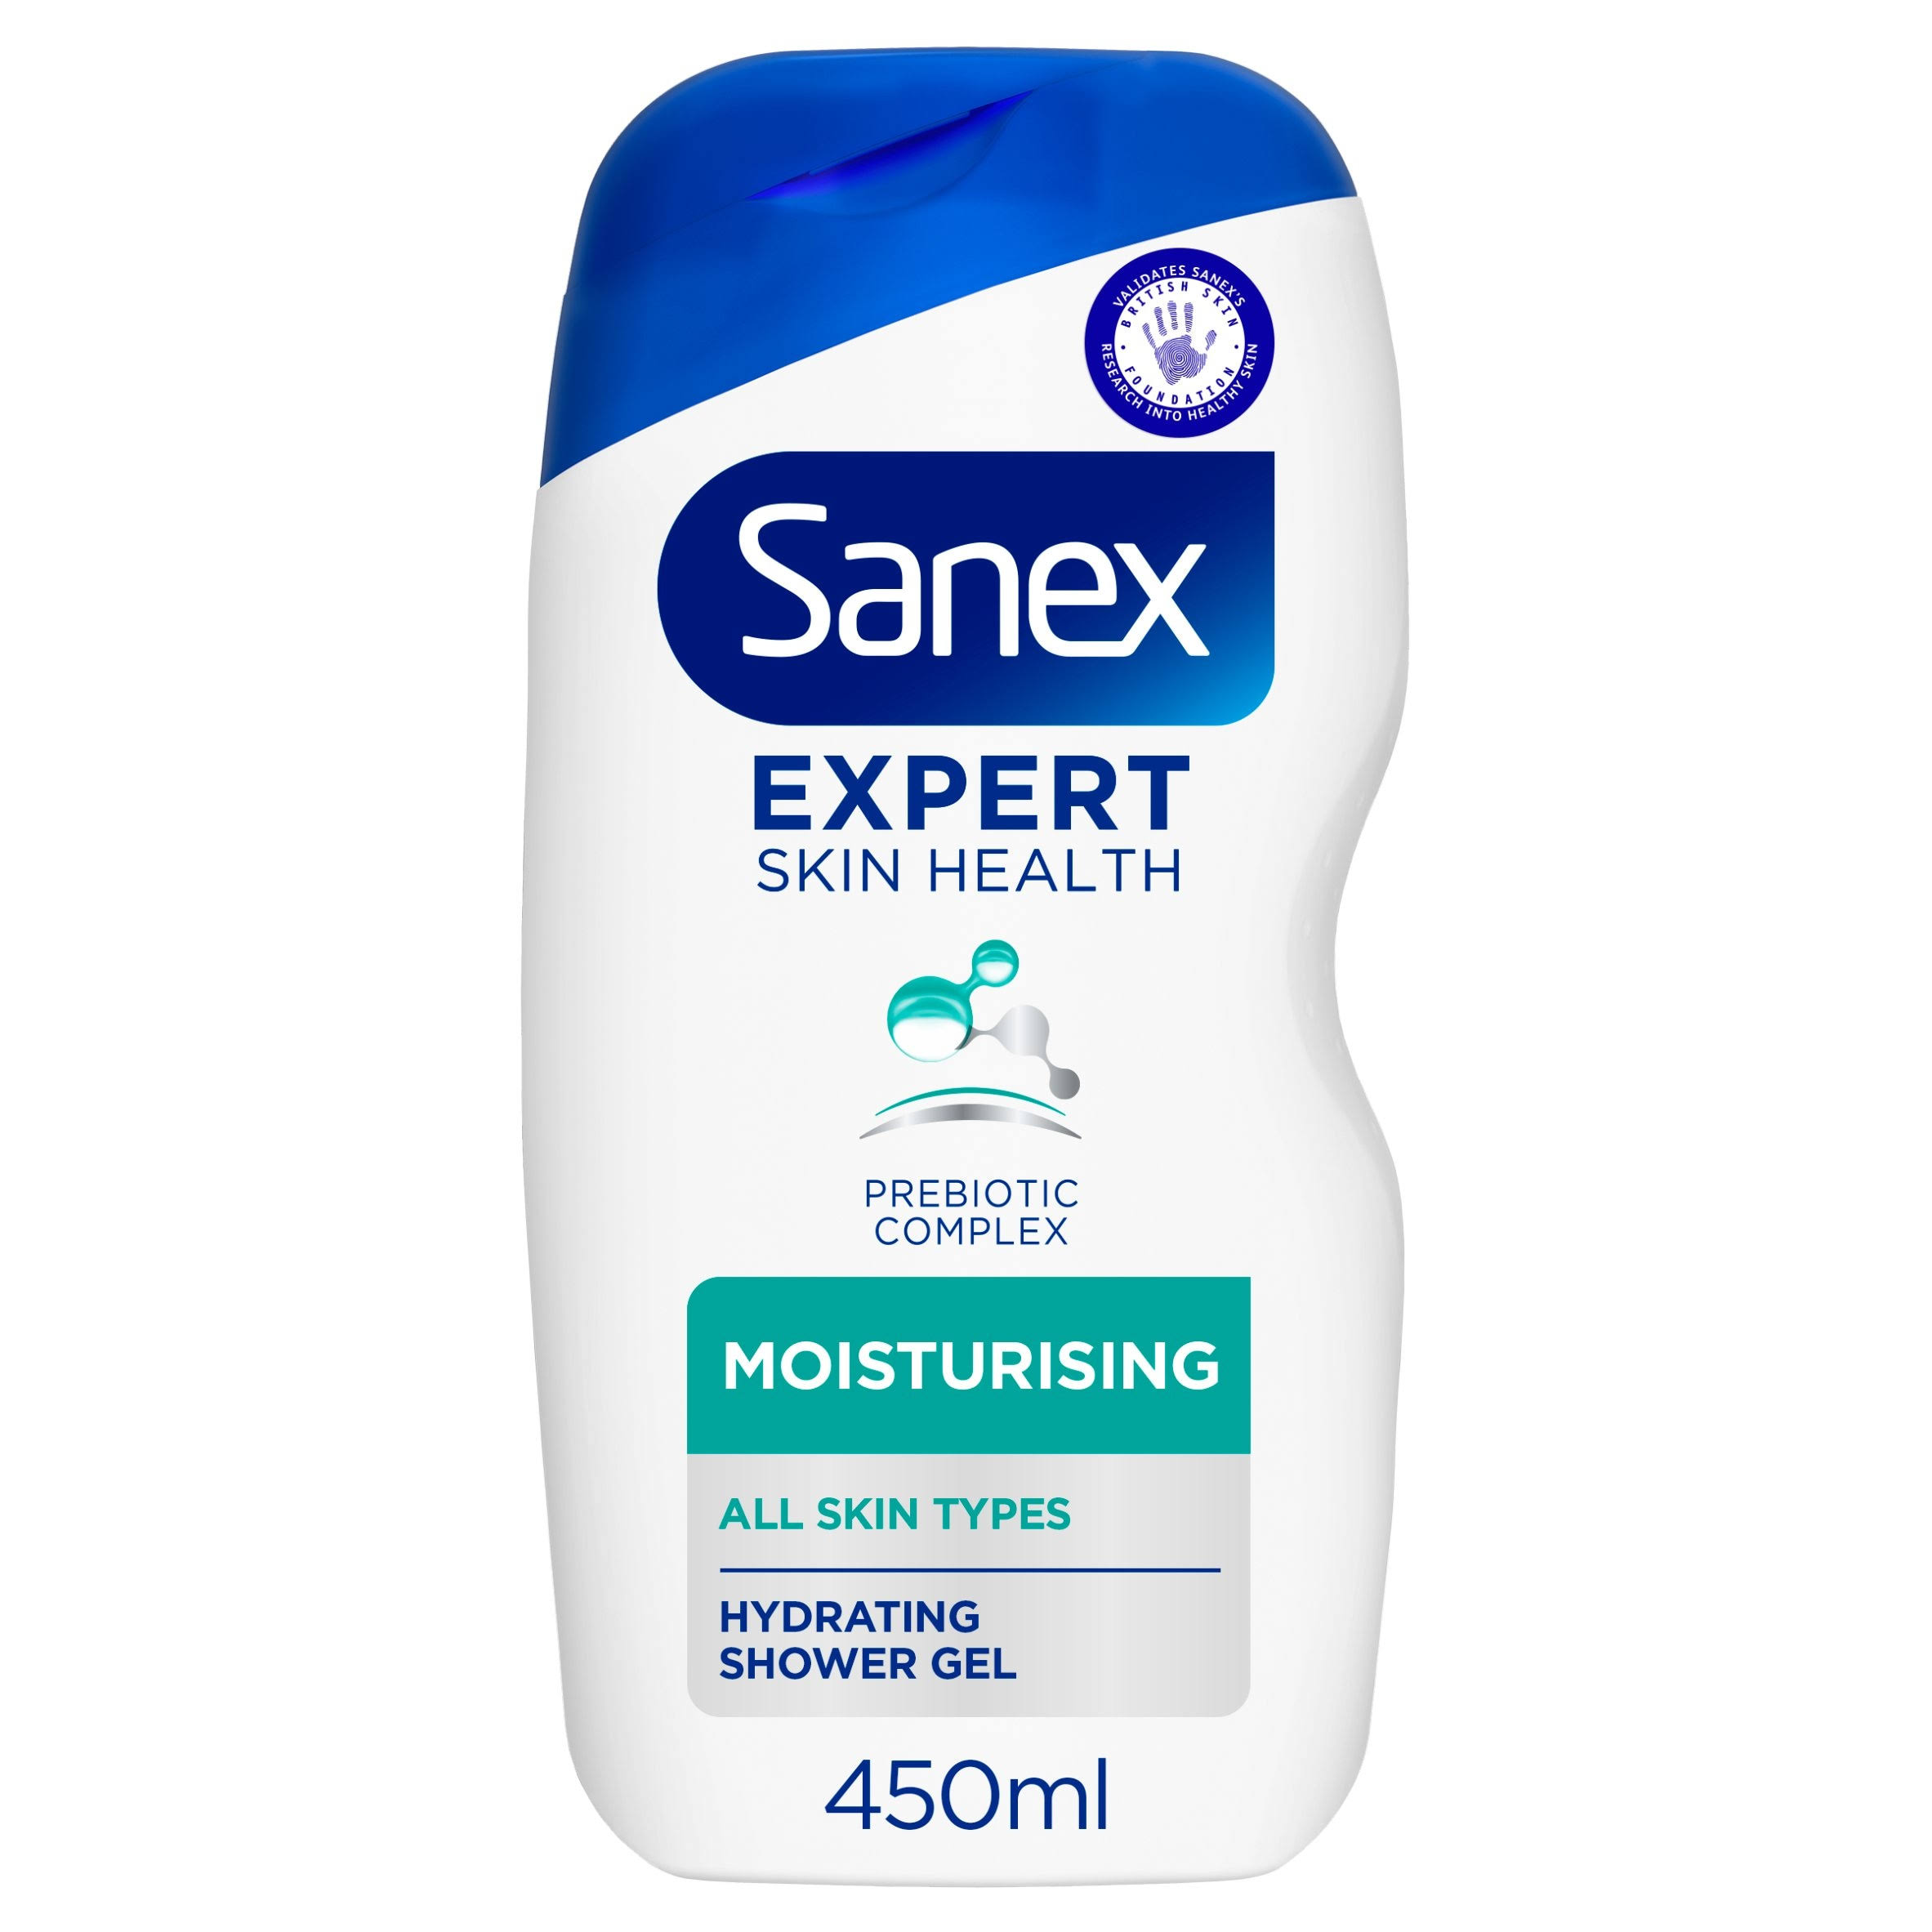 Sanex Biome Protect Moisturising Shower Gel Delivered to Canada